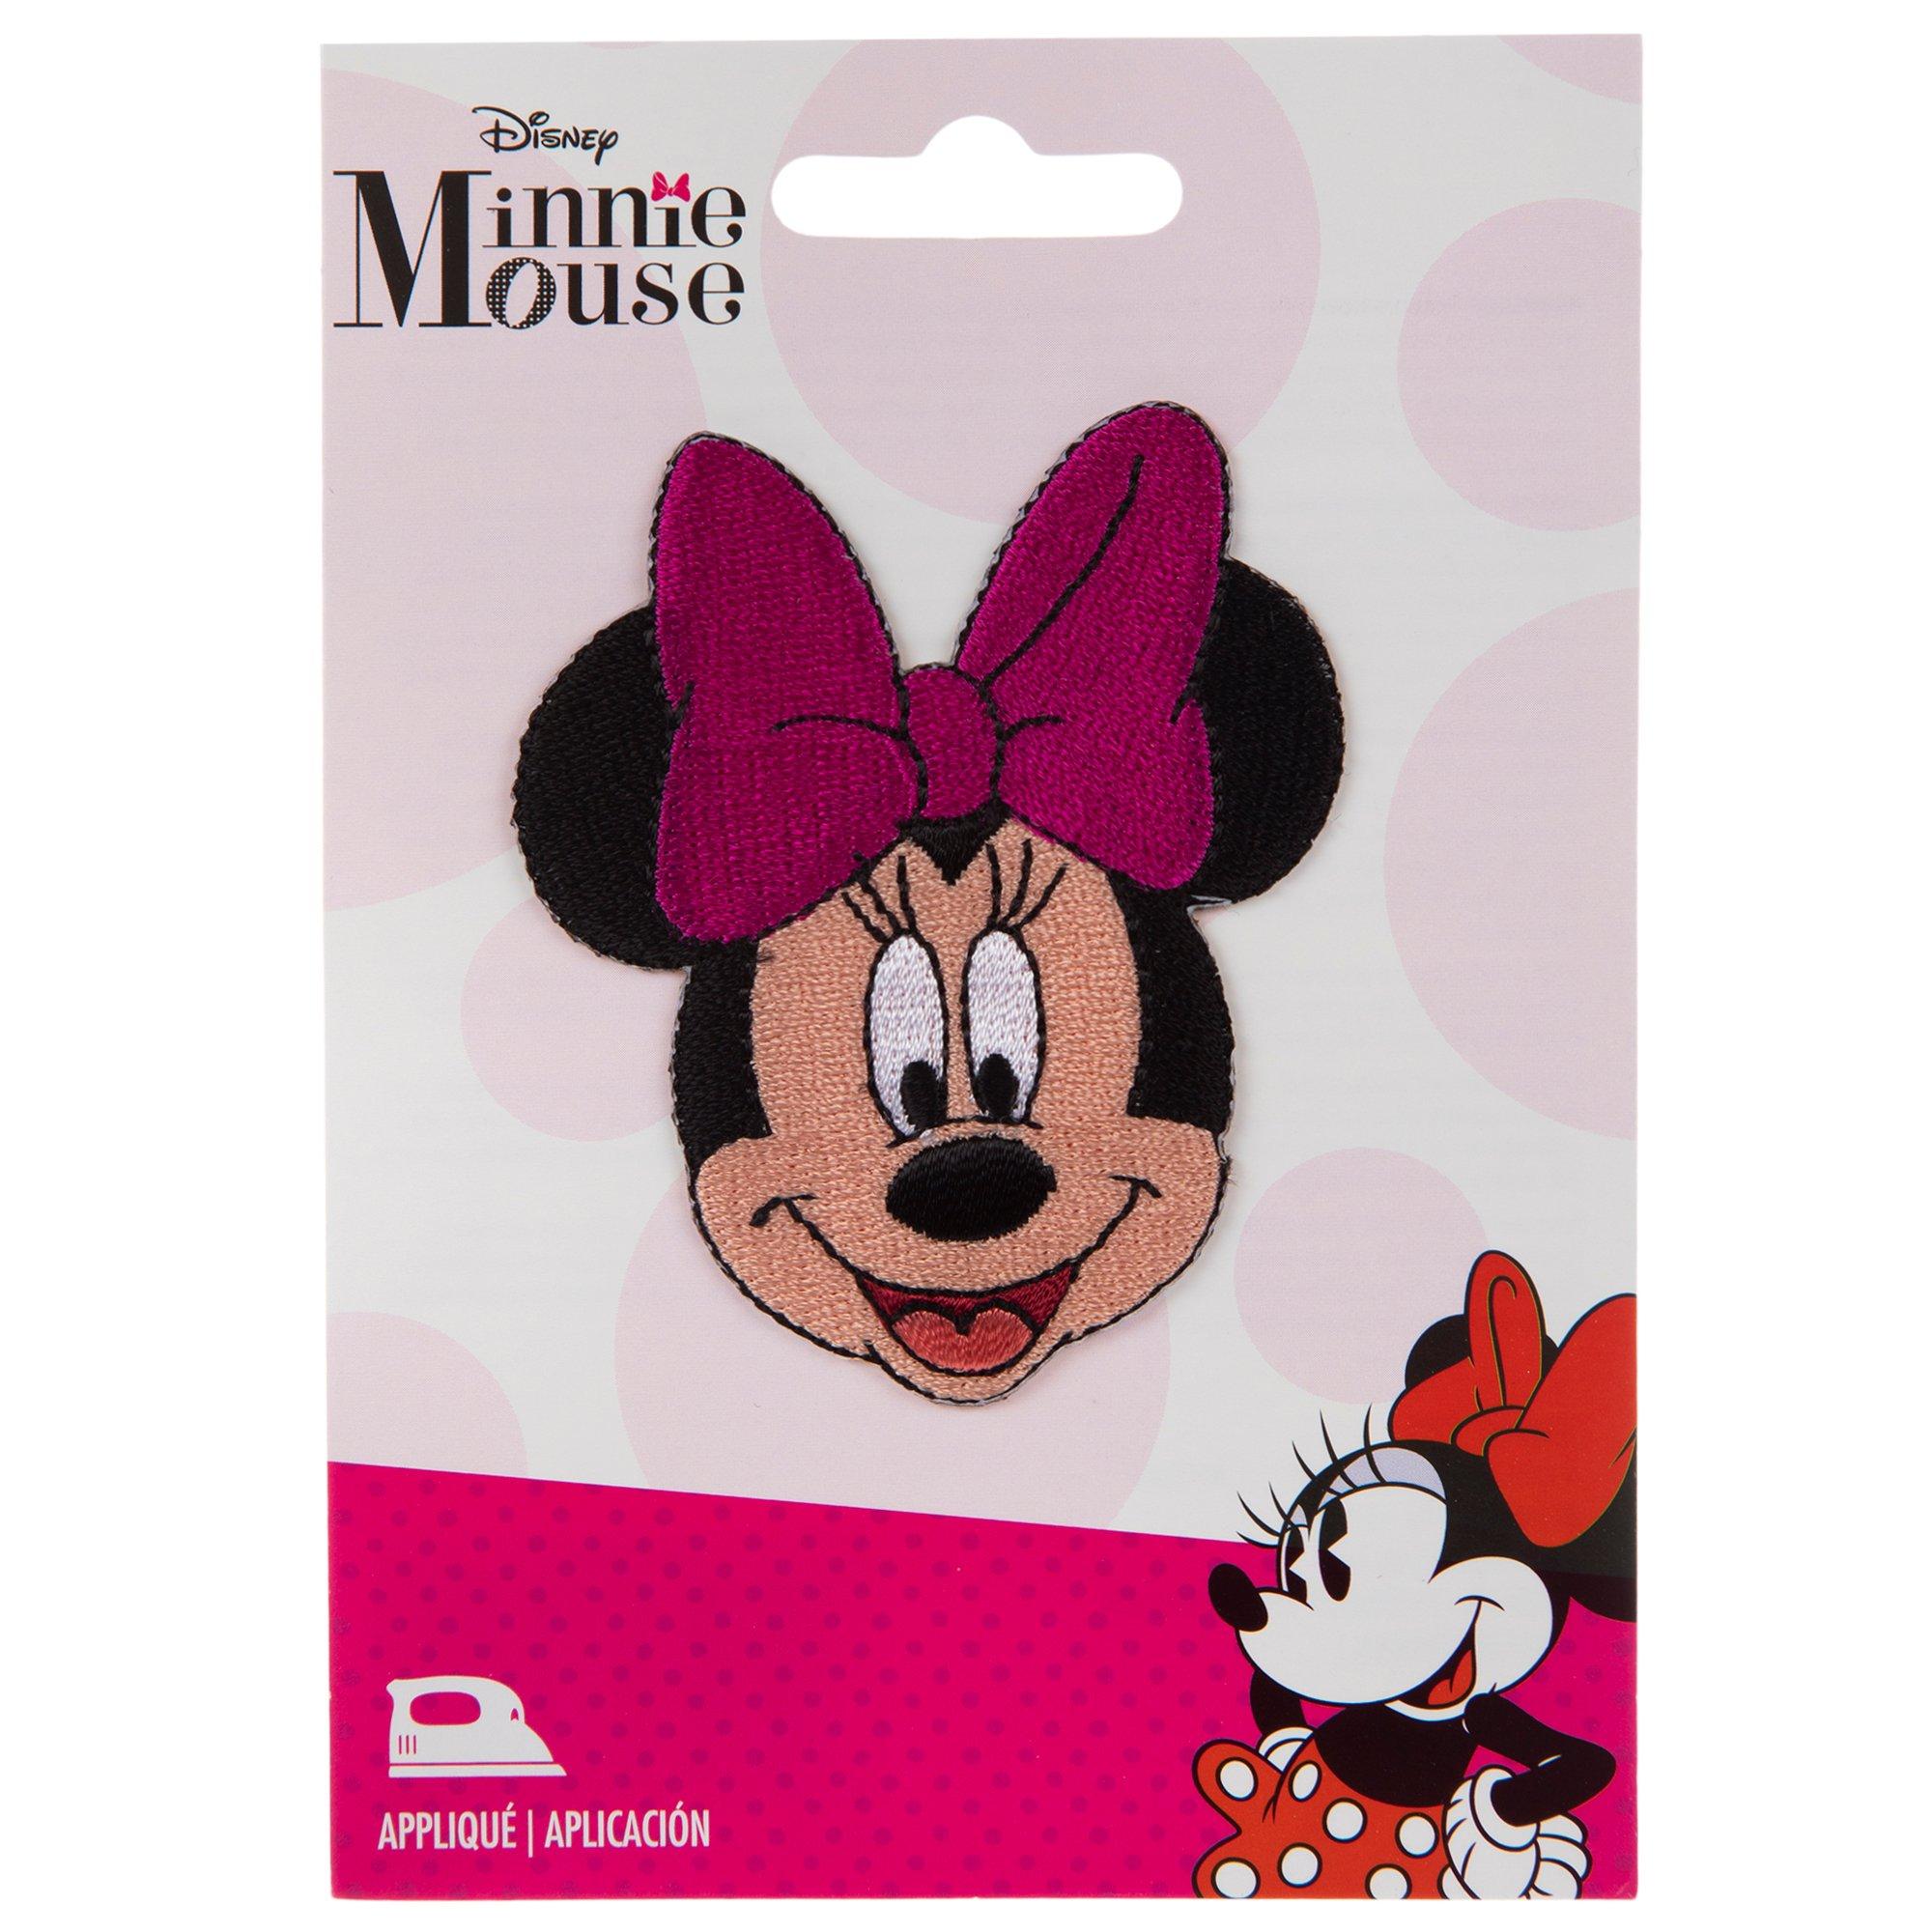 Simplicity Disney 3 Black Chenille Mickey Mouse Patch